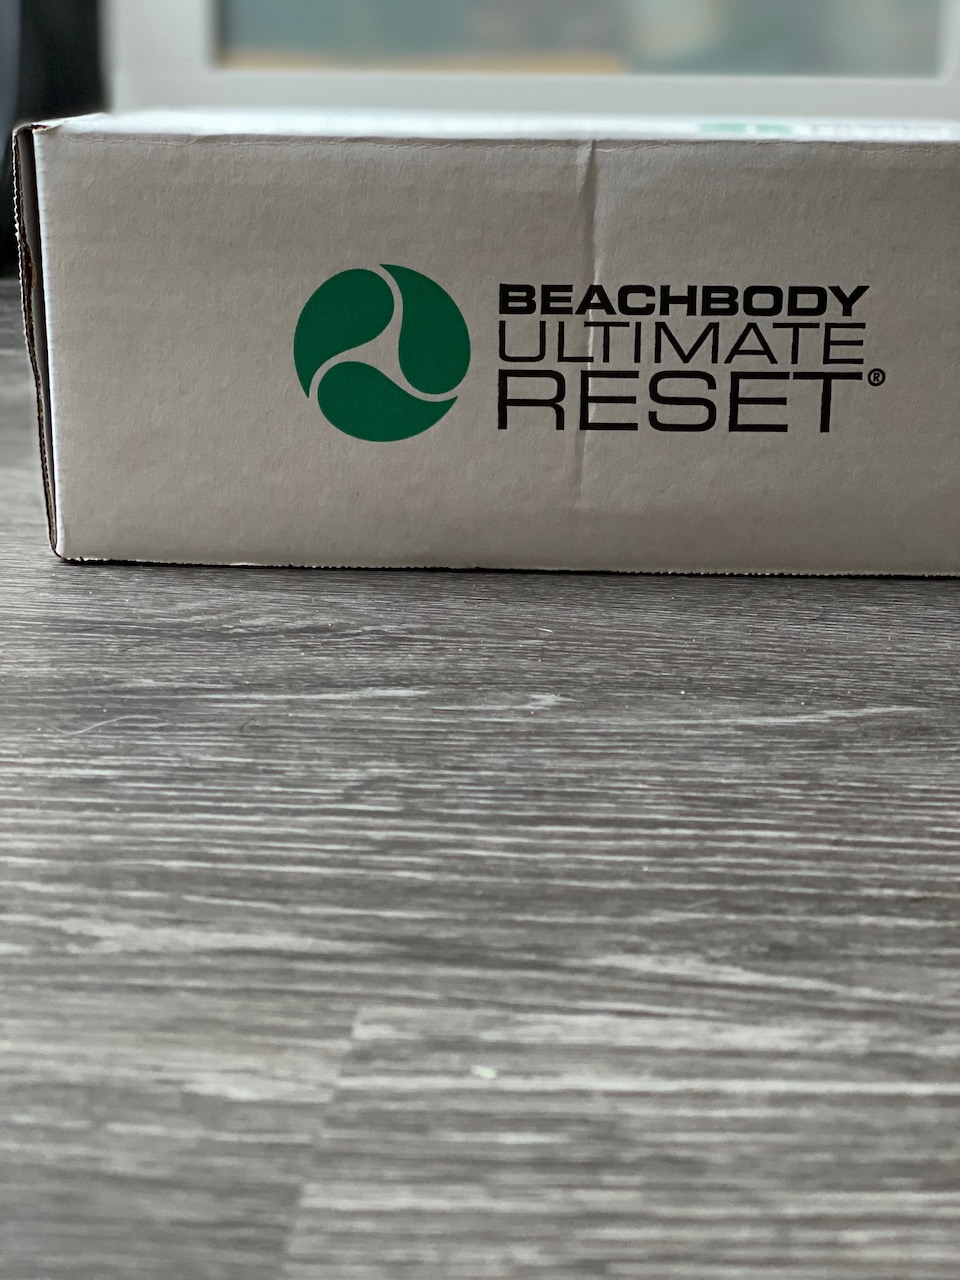 My Final Review of the Beachbody Ultimate Reset 21 Day Cleanse